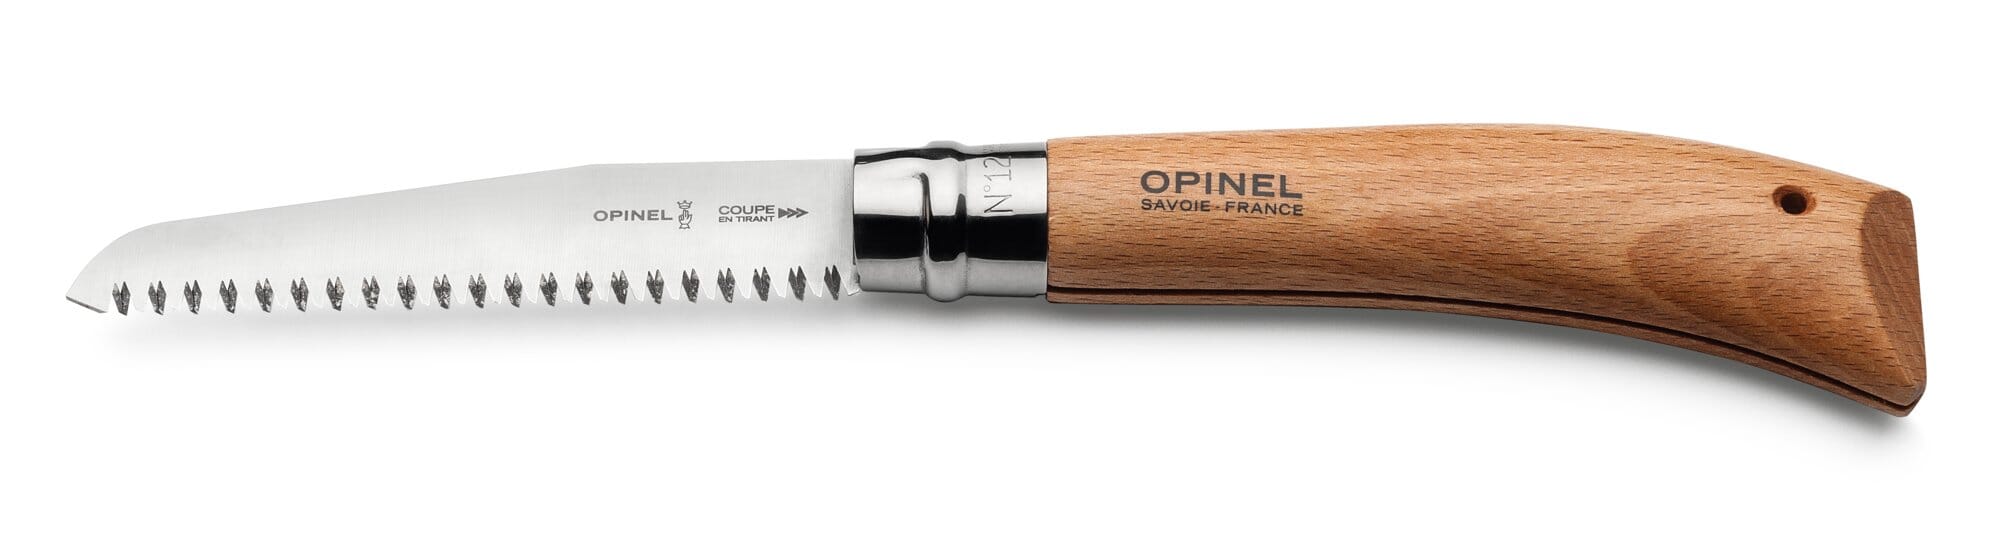 Opinel No. 12 Stainless Steel with Saw Teeth Serrated Made in France Not  China 